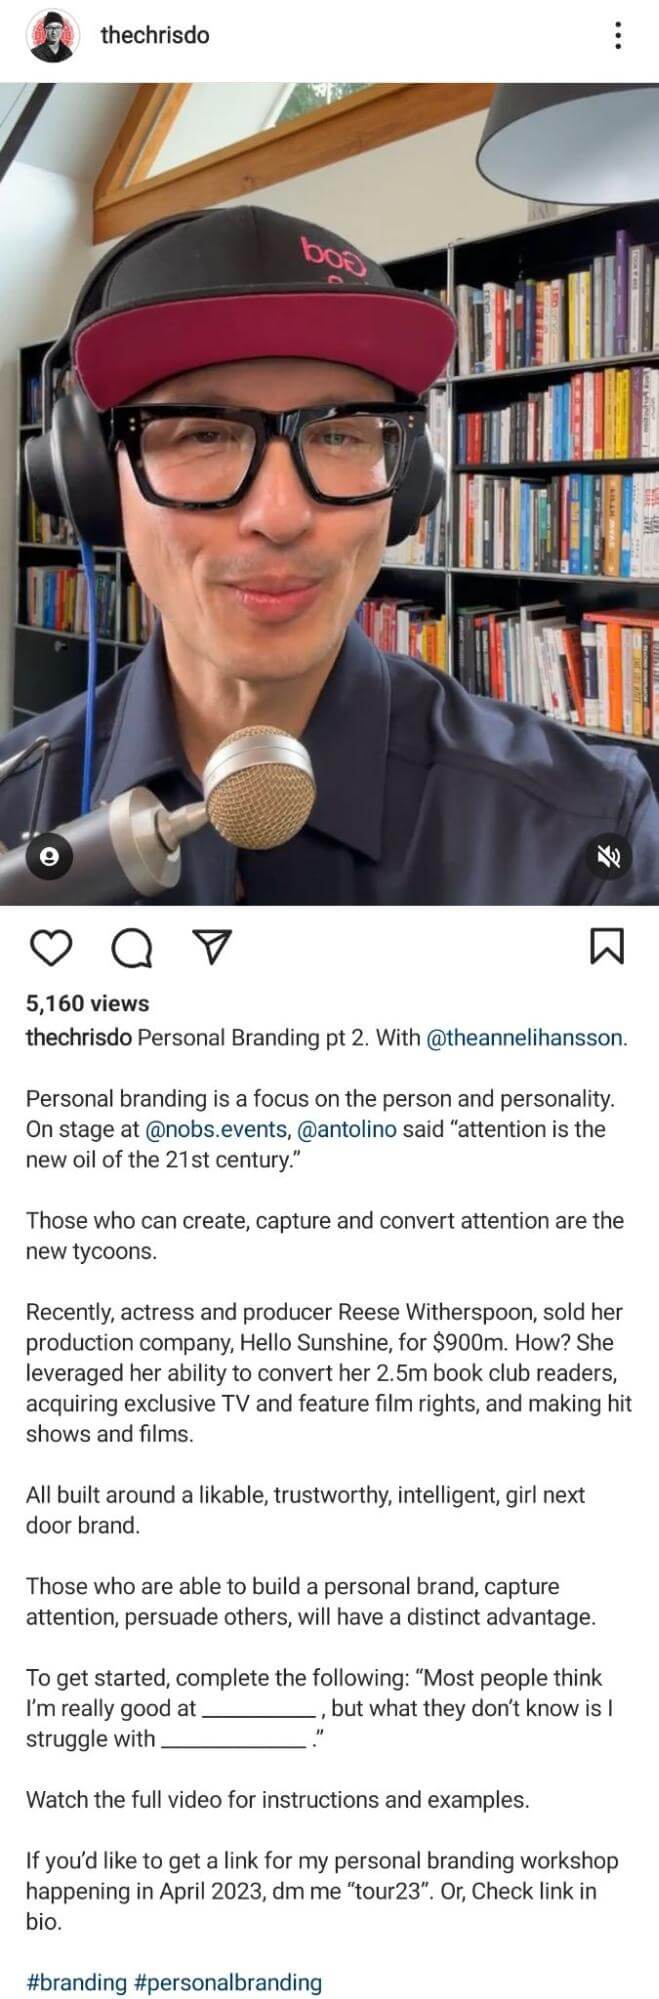 how-to-go-live-to-generate-real-time-engagement-on-instagram-boost-host-livestream-conversations-that-generate-comments-personal-branding-thechrisdo-theannelihansson-example-9